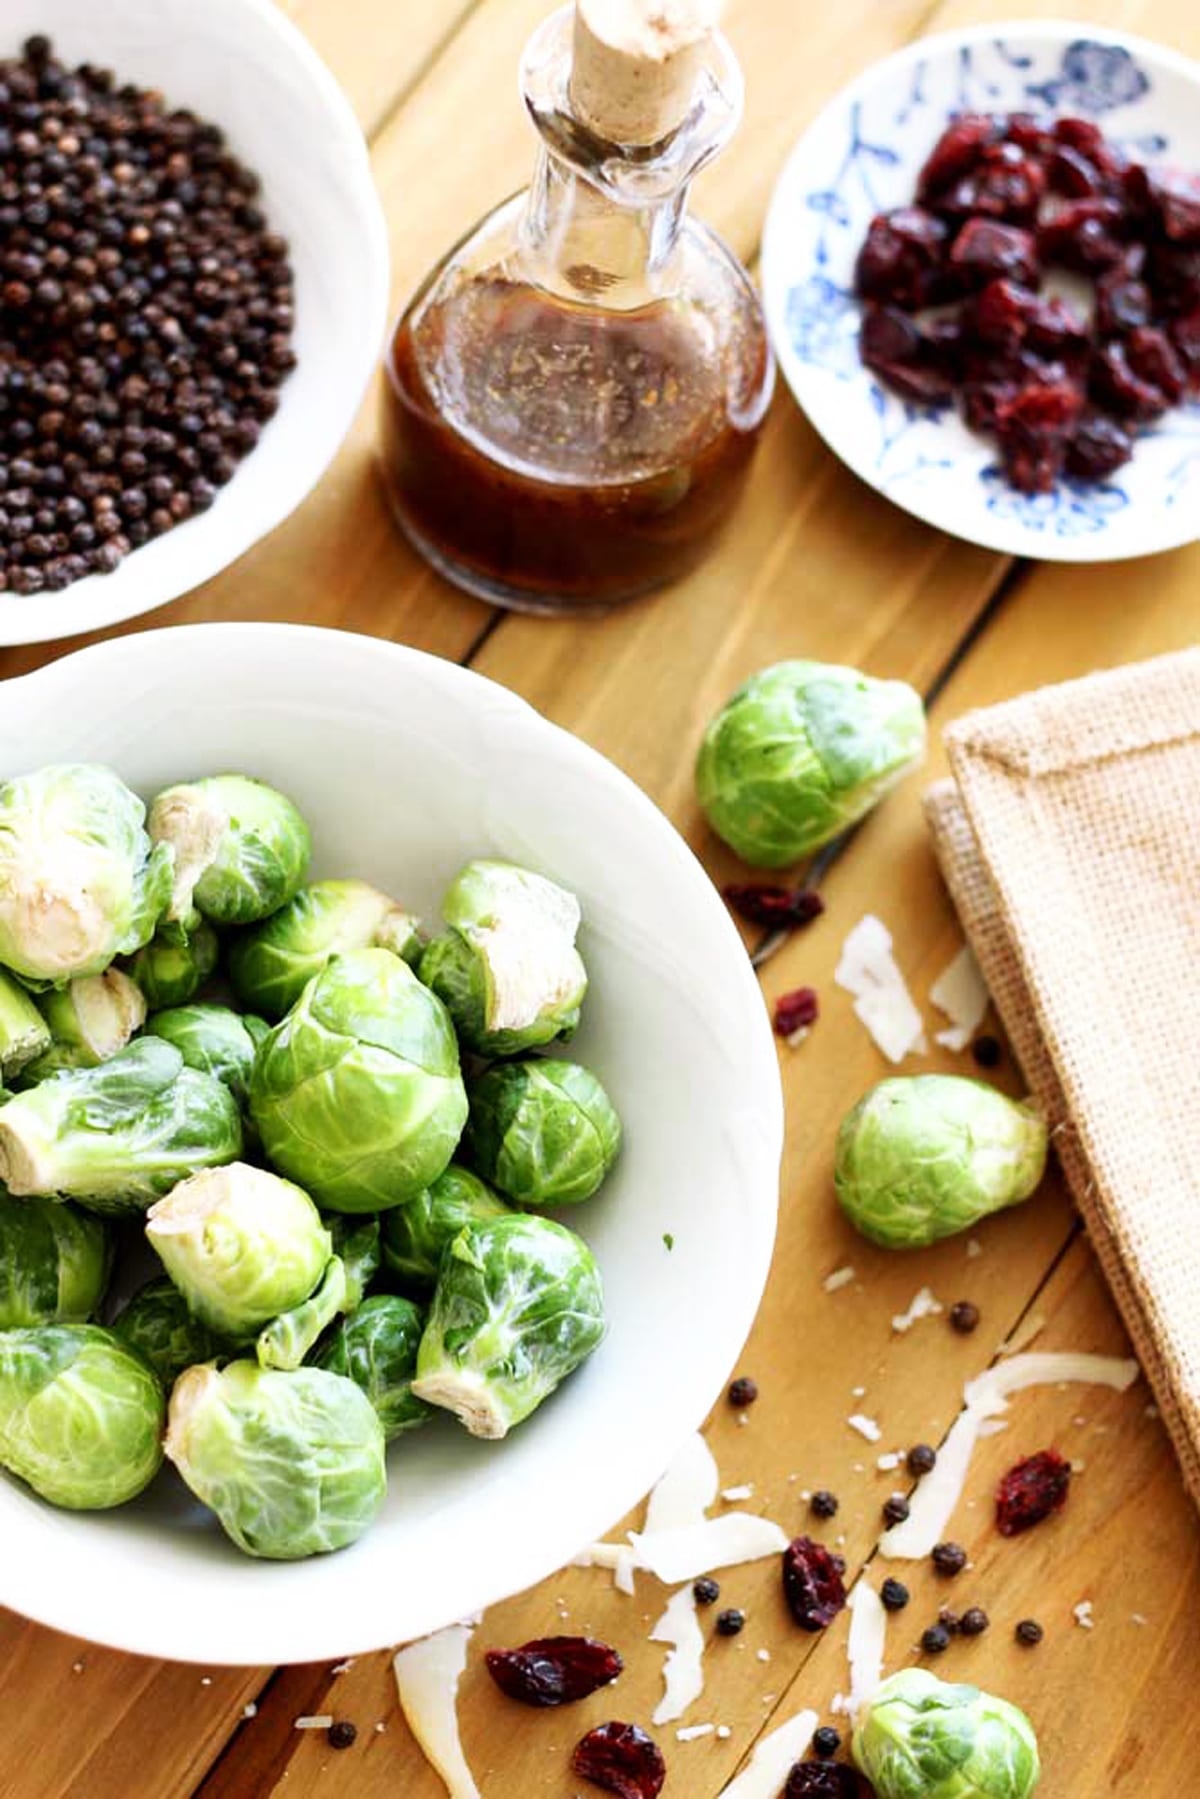 White bowl containing Brussel Sprouts, Parmesan cheese, cranberries and vinaigrette dressing on wooden table. 